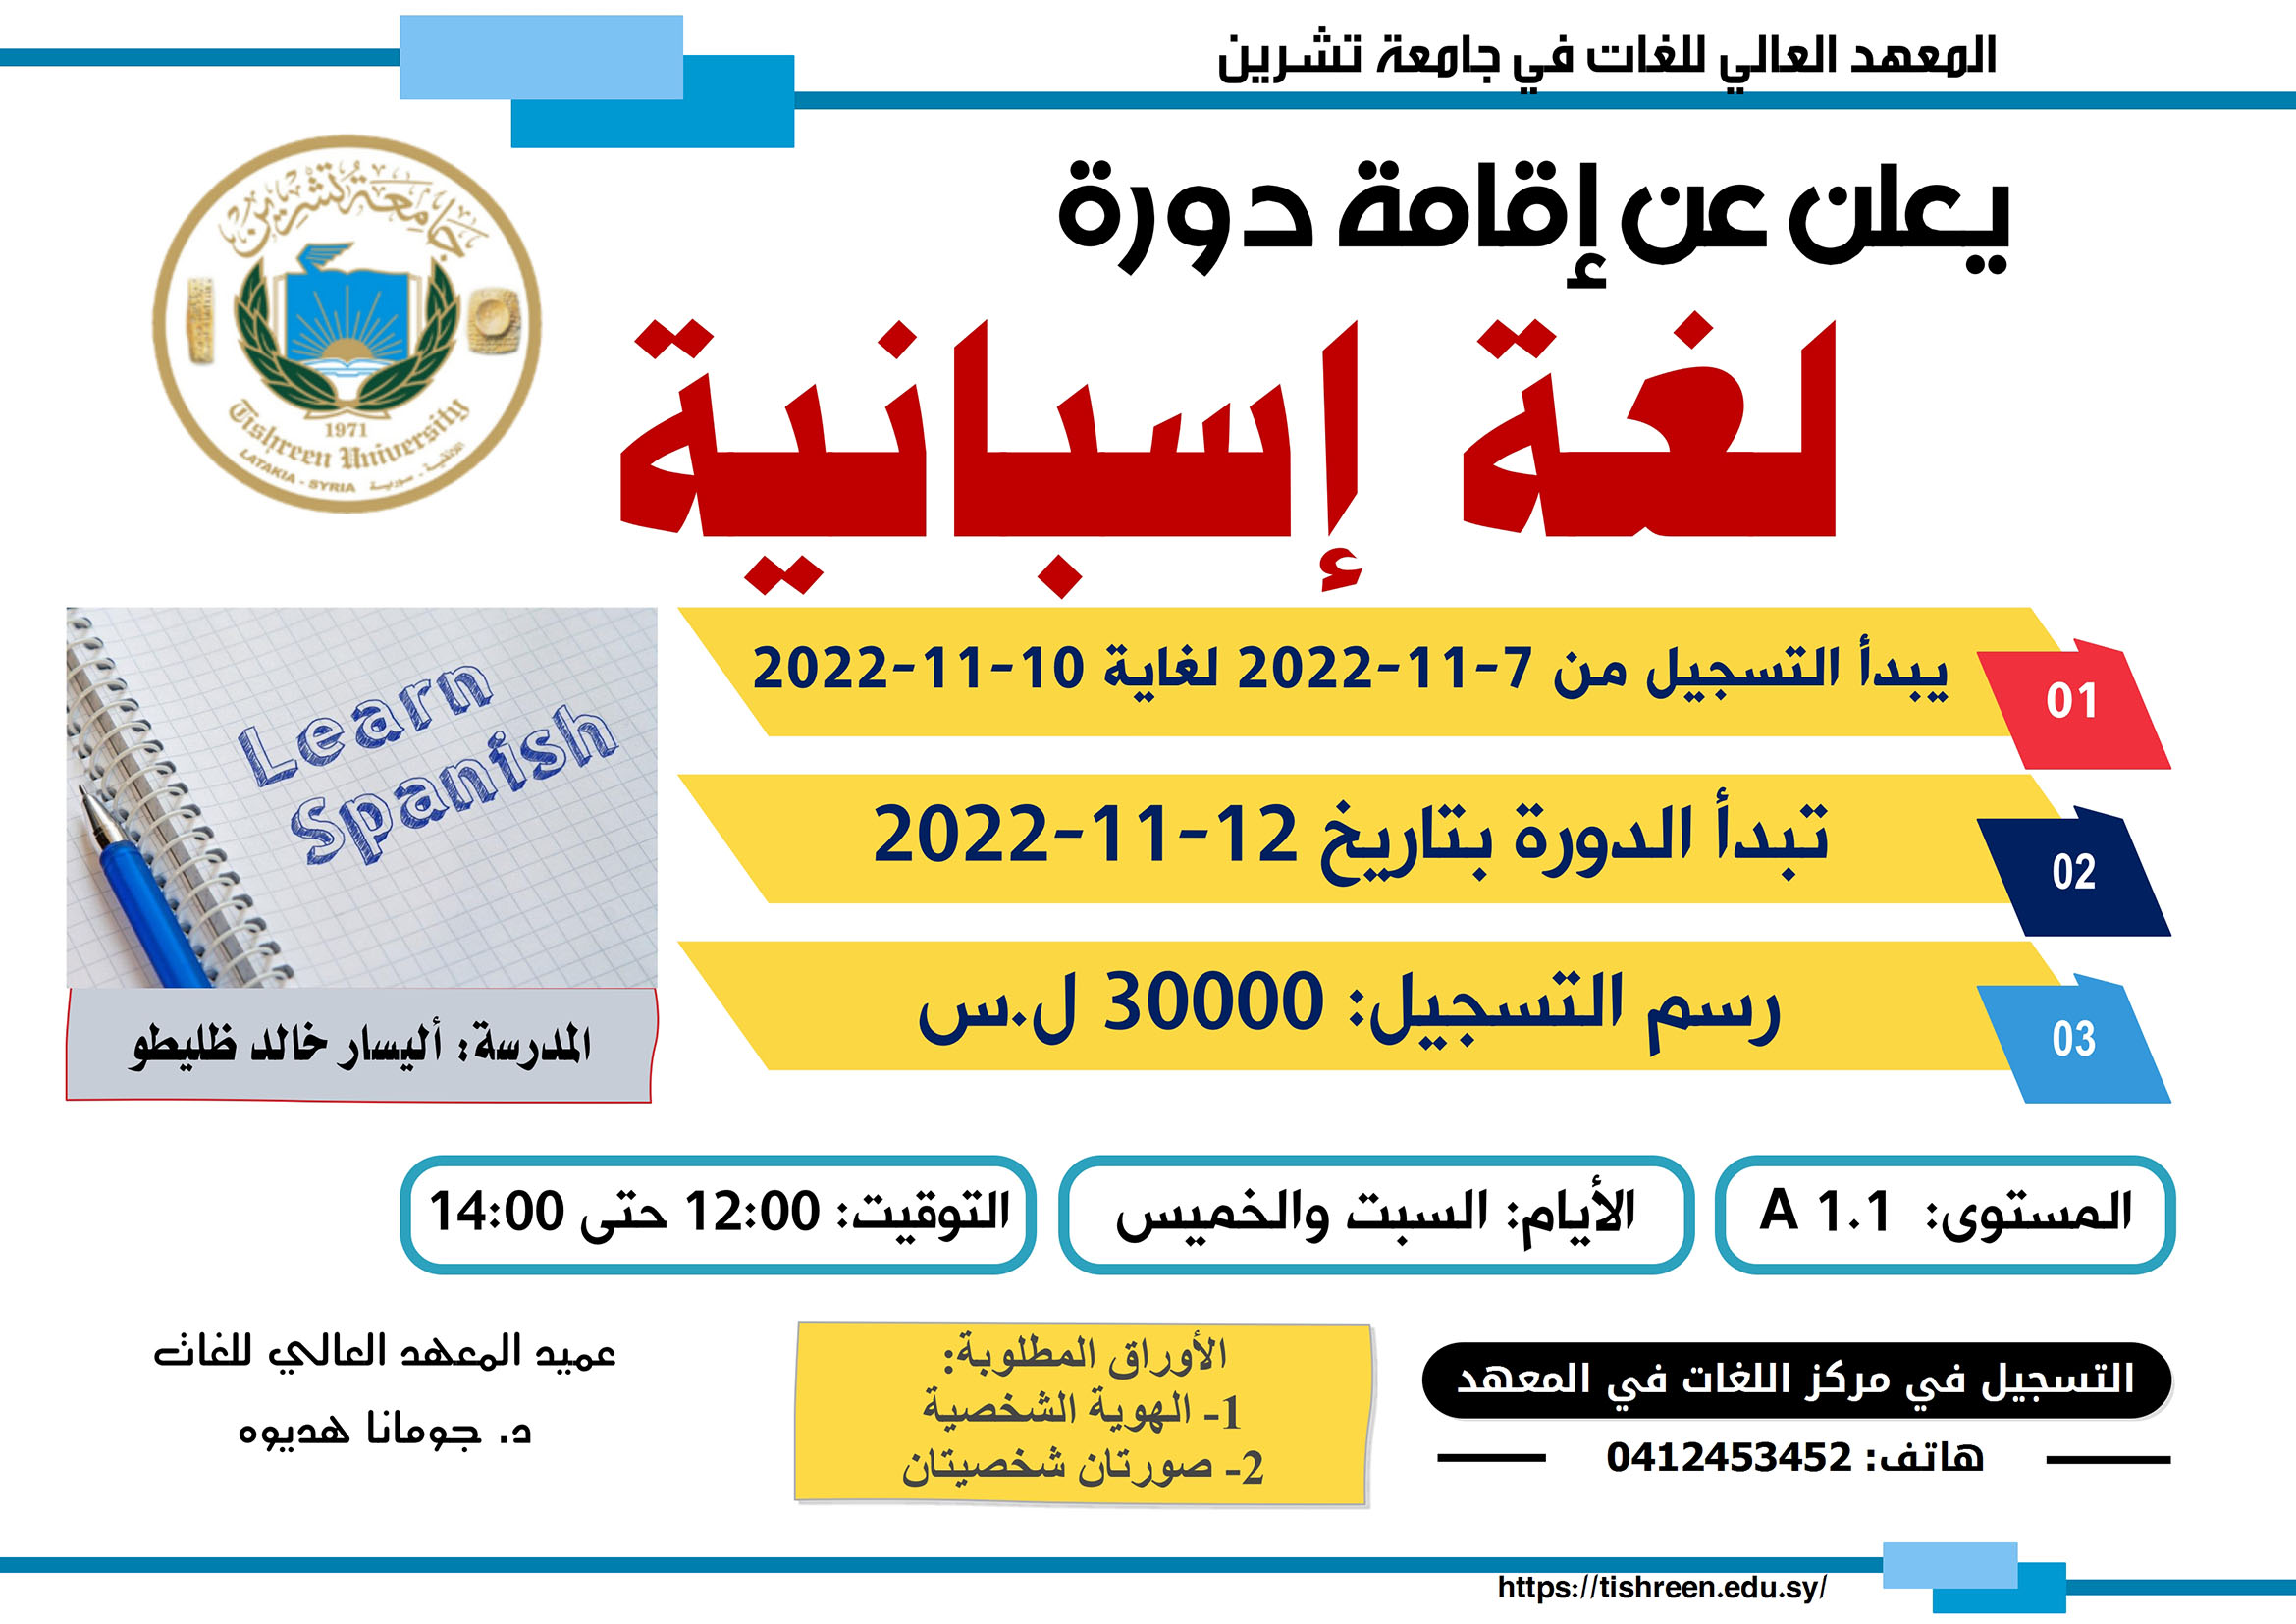 The Higher Institute of Languages ​​announces the establishment of a course in Spanish, starting on 11-12-2022